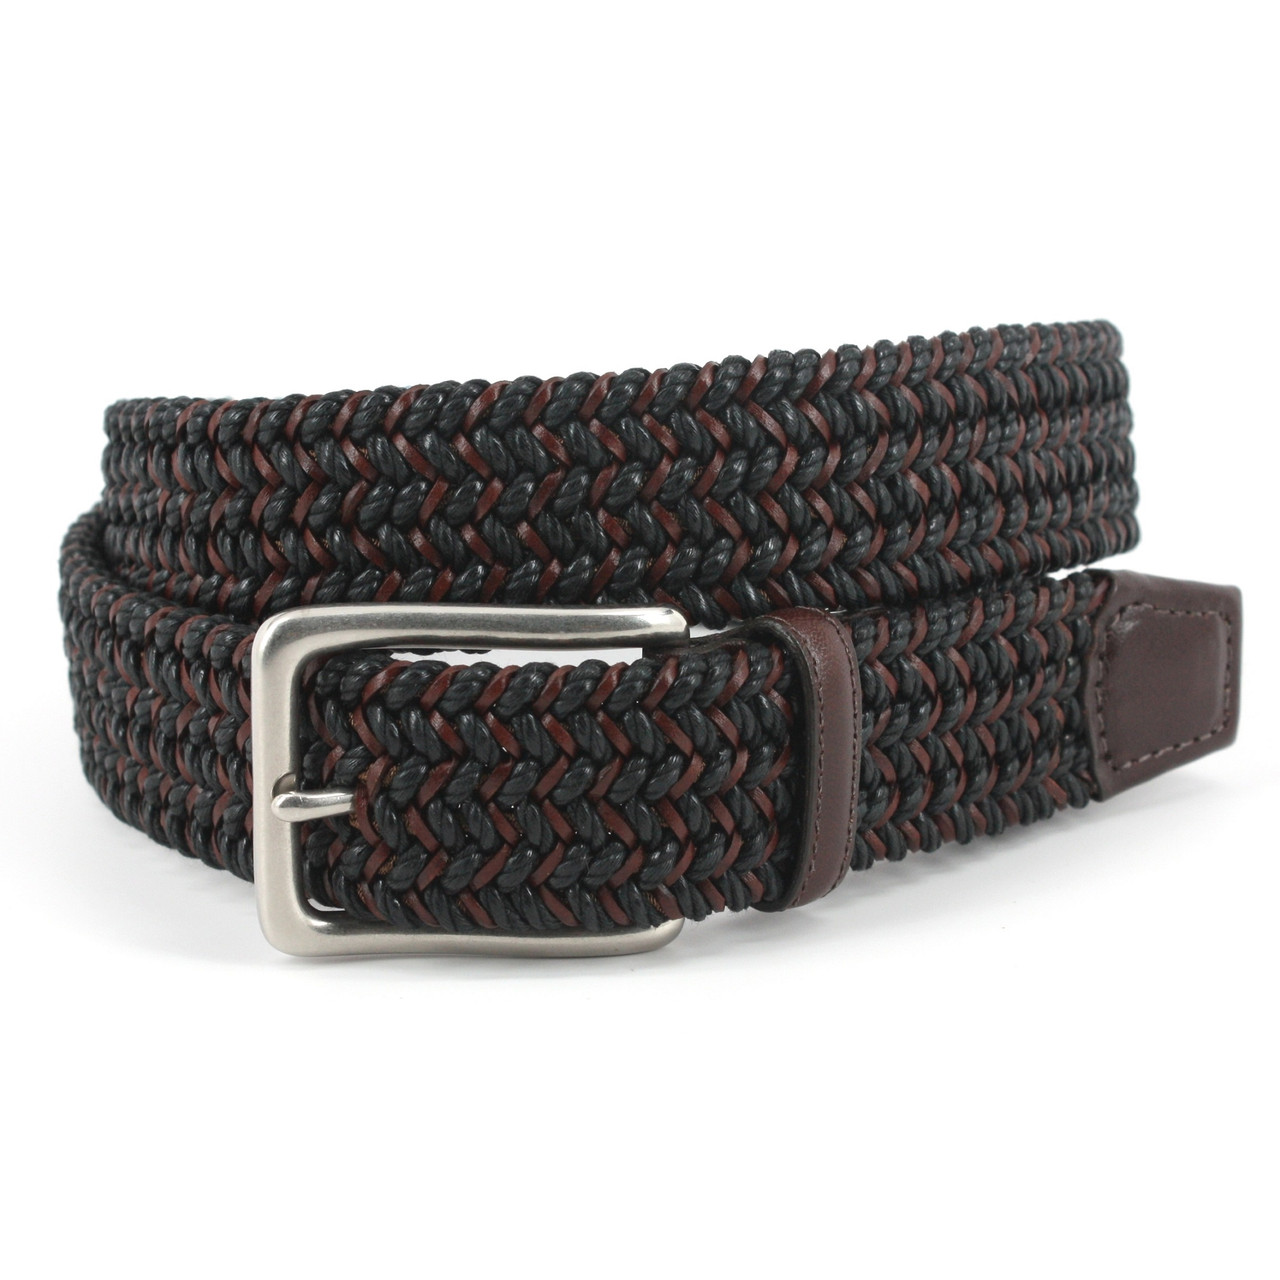 Italian Woven Cotton & Leather Casual Belt - Black/Brown